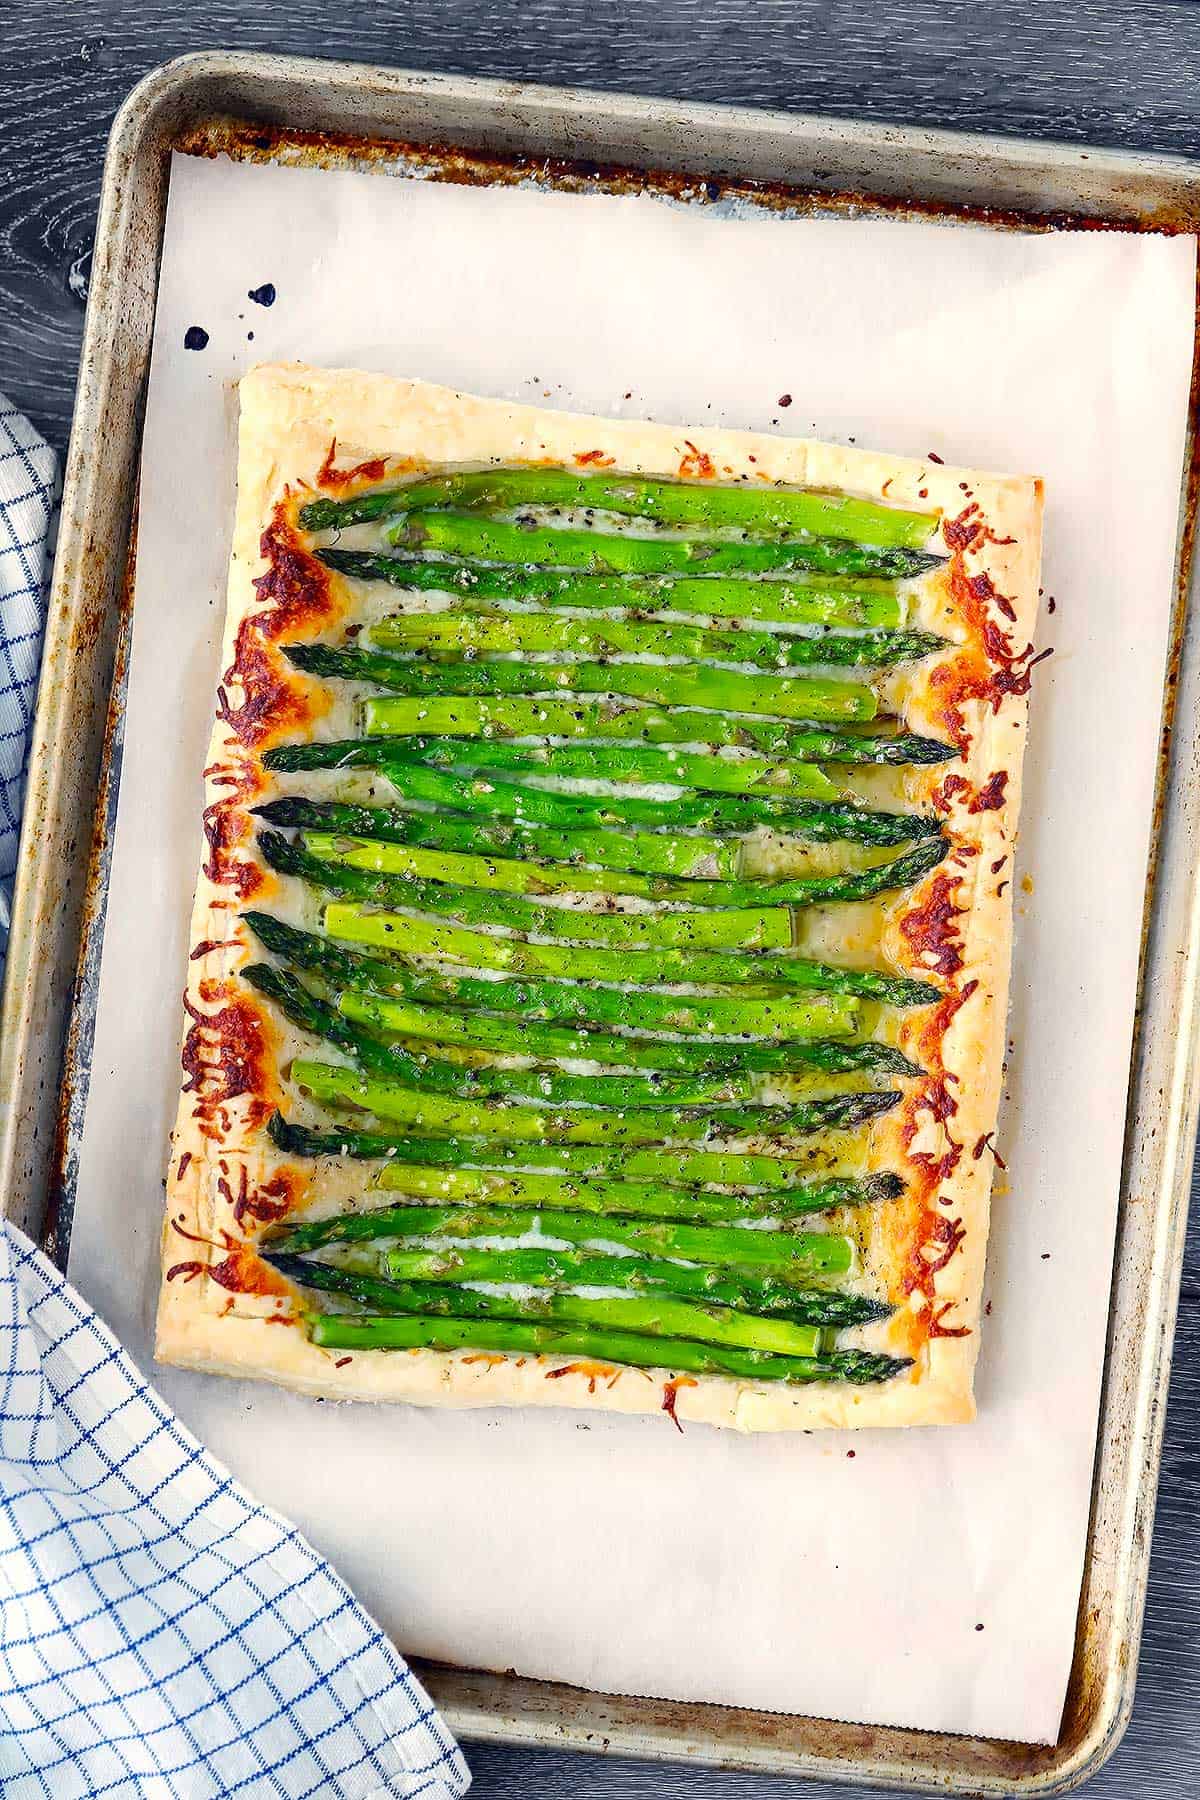 An asparagus tart made with puff pastry on a baking sheet on parchment paper.